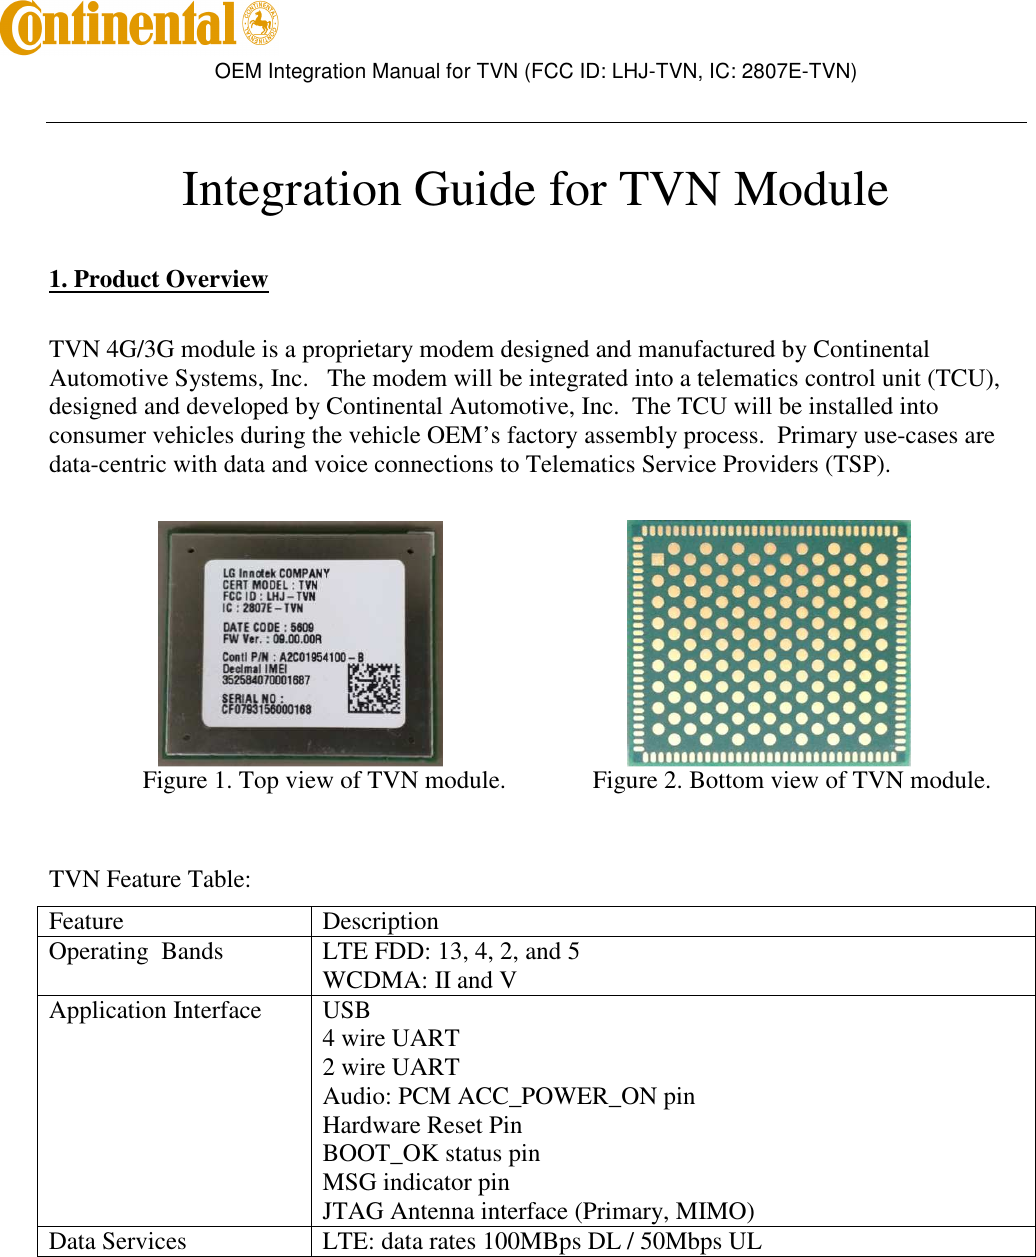        OEM Integration Manual for TVN (FCC ID: LHJ-TVN, IC: 2807E-TVN)    Integration Guide for TVN Module   1. Product Overview  TVN 4G/3G module is a proprietary modem designed and manufactured by Continental Automotive Systems, Inc.   The modem will be integrated into a telematics control unit (TCU), designed and developed by Continental Automotive, Inc.  The TCU will be installed into consumer vehicles during the vehicle OEM’s factory assembly process.  Primary use-cases are data-centric with data and voice connections to Telematics Service Providers (TSP).                                                           Figure 1. Top view of TVN module.     Figure 2. Bottom view of TVN module.   TVN Feature Table: Feature  Description Operating  Bands  LTE FDD: 13, 4, 2, and 5 WCDMA: II and V Application Interface  USB 4 wire UART 2 wire UART Audio: PCM ACC_POWER_ON pin Hardware Reset Pin BOOT_OK status pin MSG indicator pin JTAG Antenna interface (Primary, MIMO) Data Services  LTE: data rates 100MBps DL / 50Mbps UL    